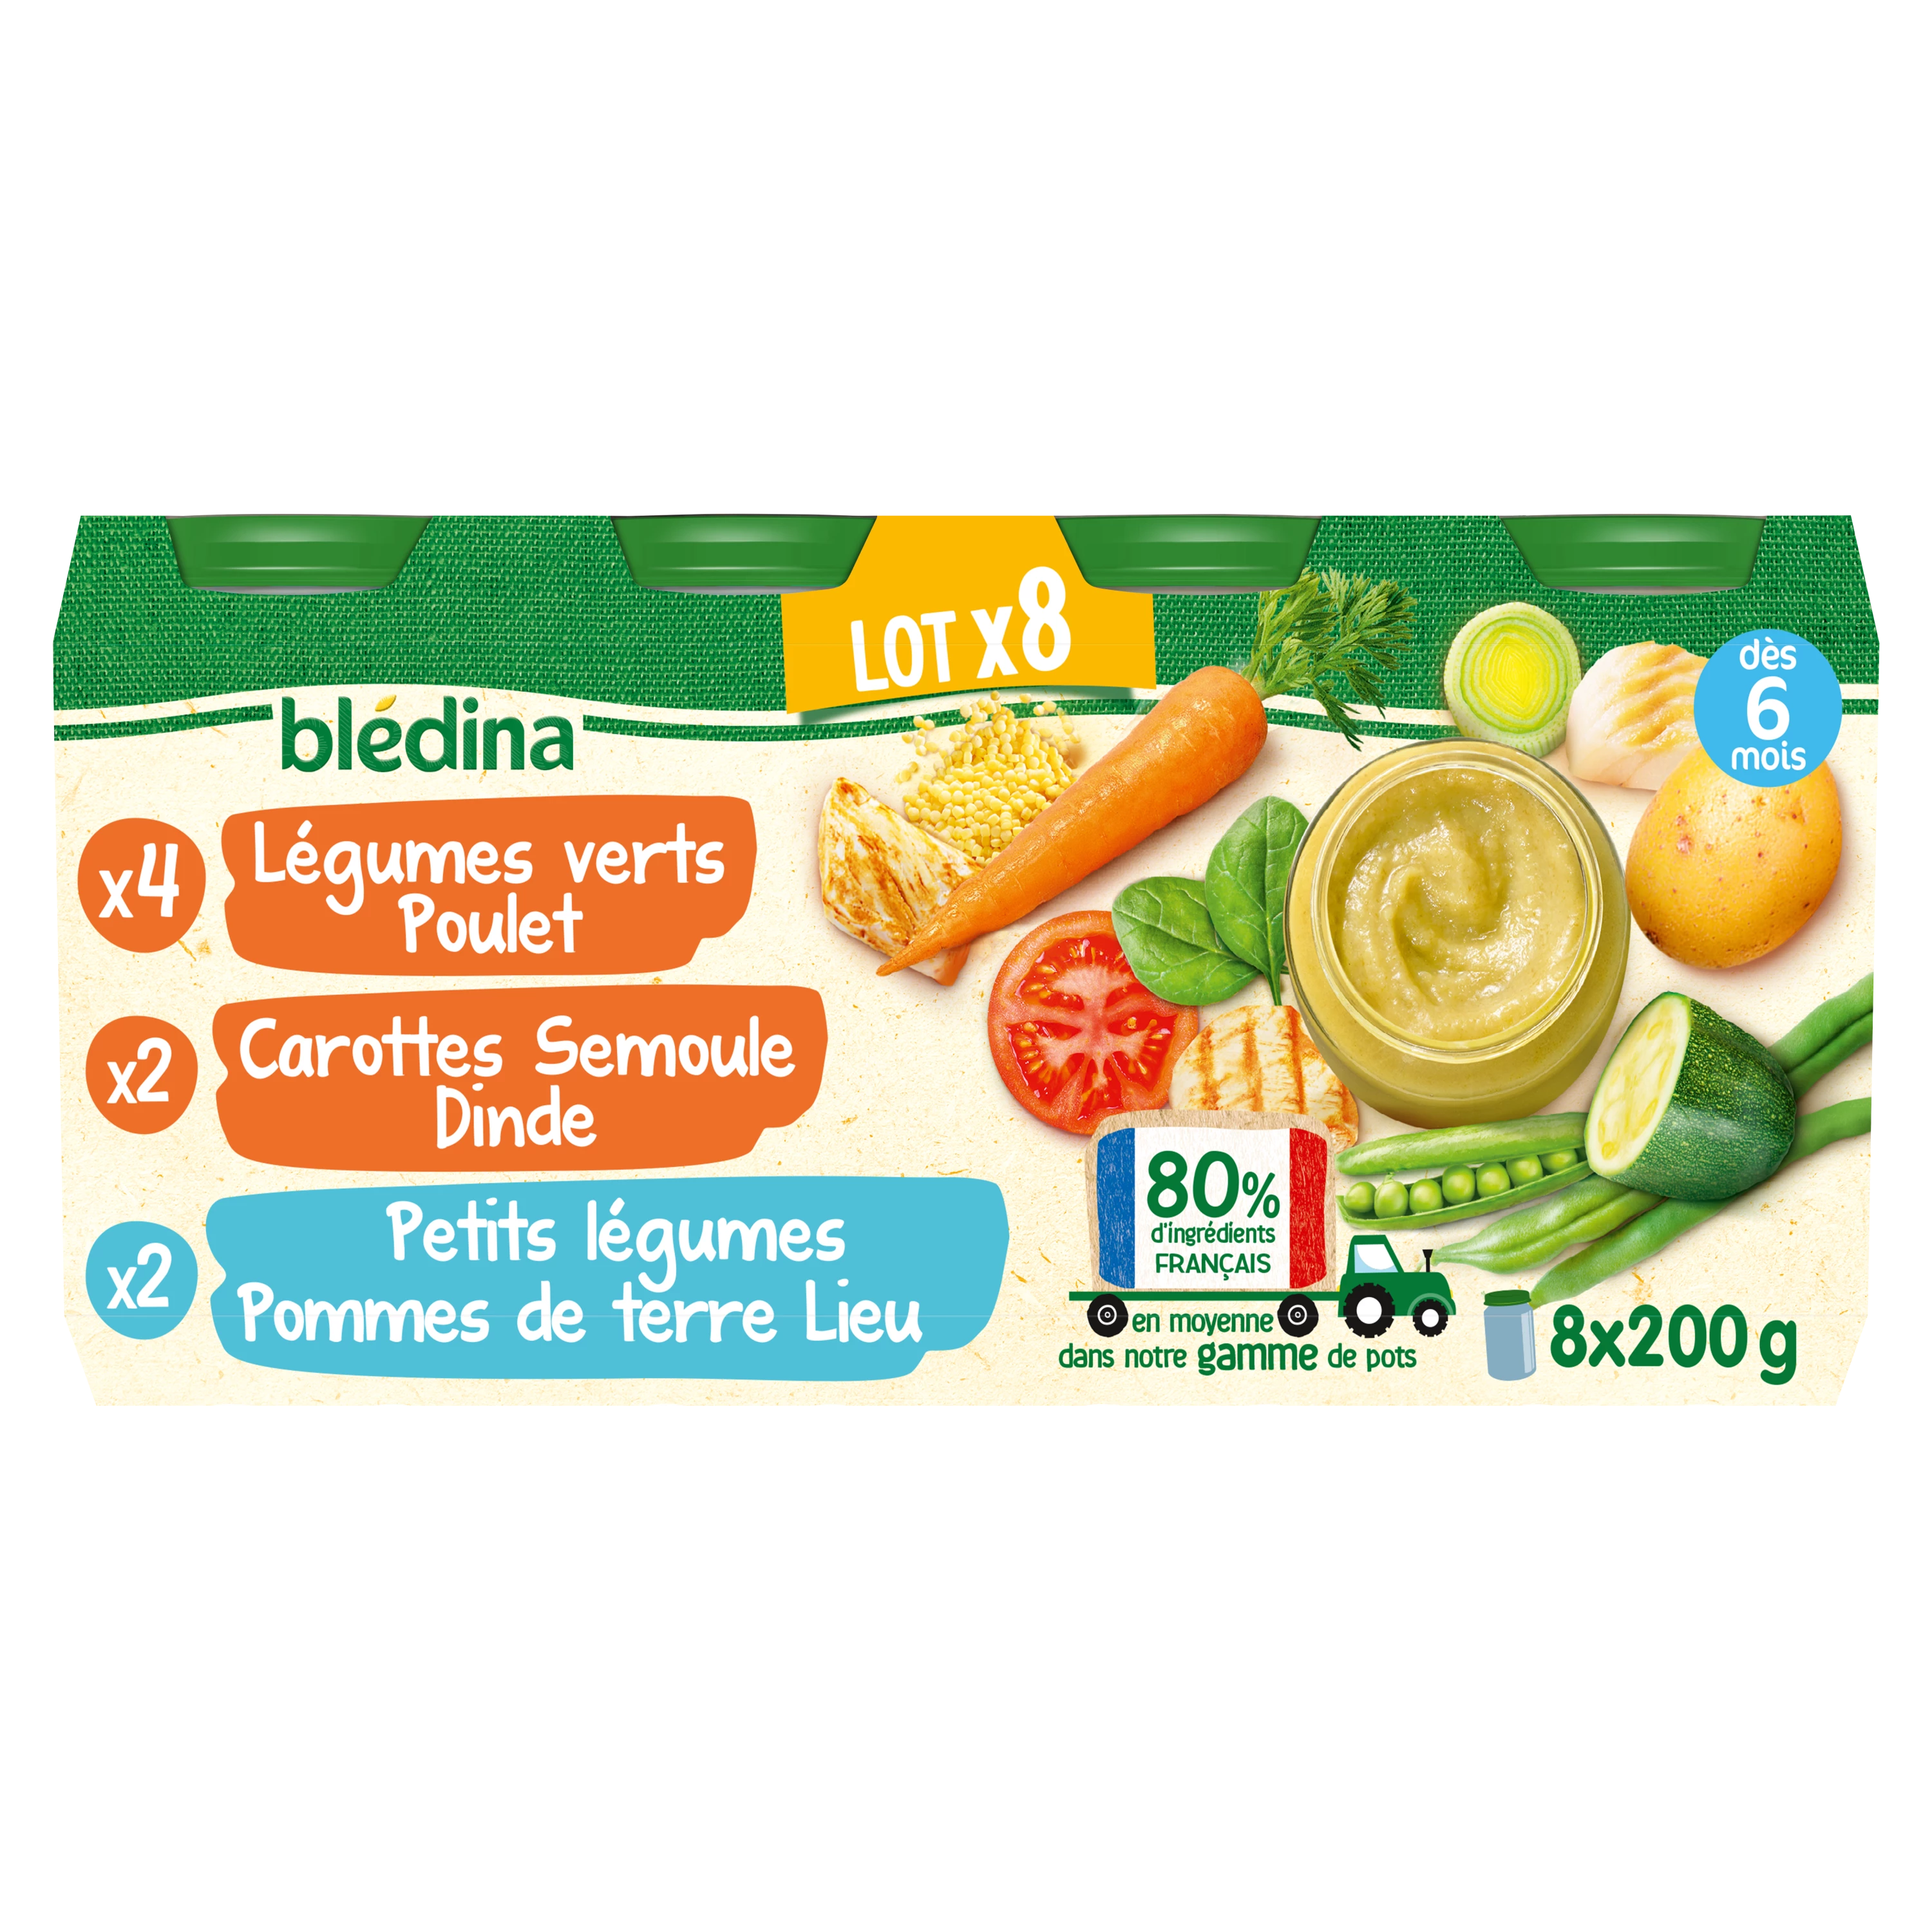 Small baby pot from 6 months green vegetables chicken, carrots semolina turkey and vegetables potatoes place 8x200g - BLEDINA